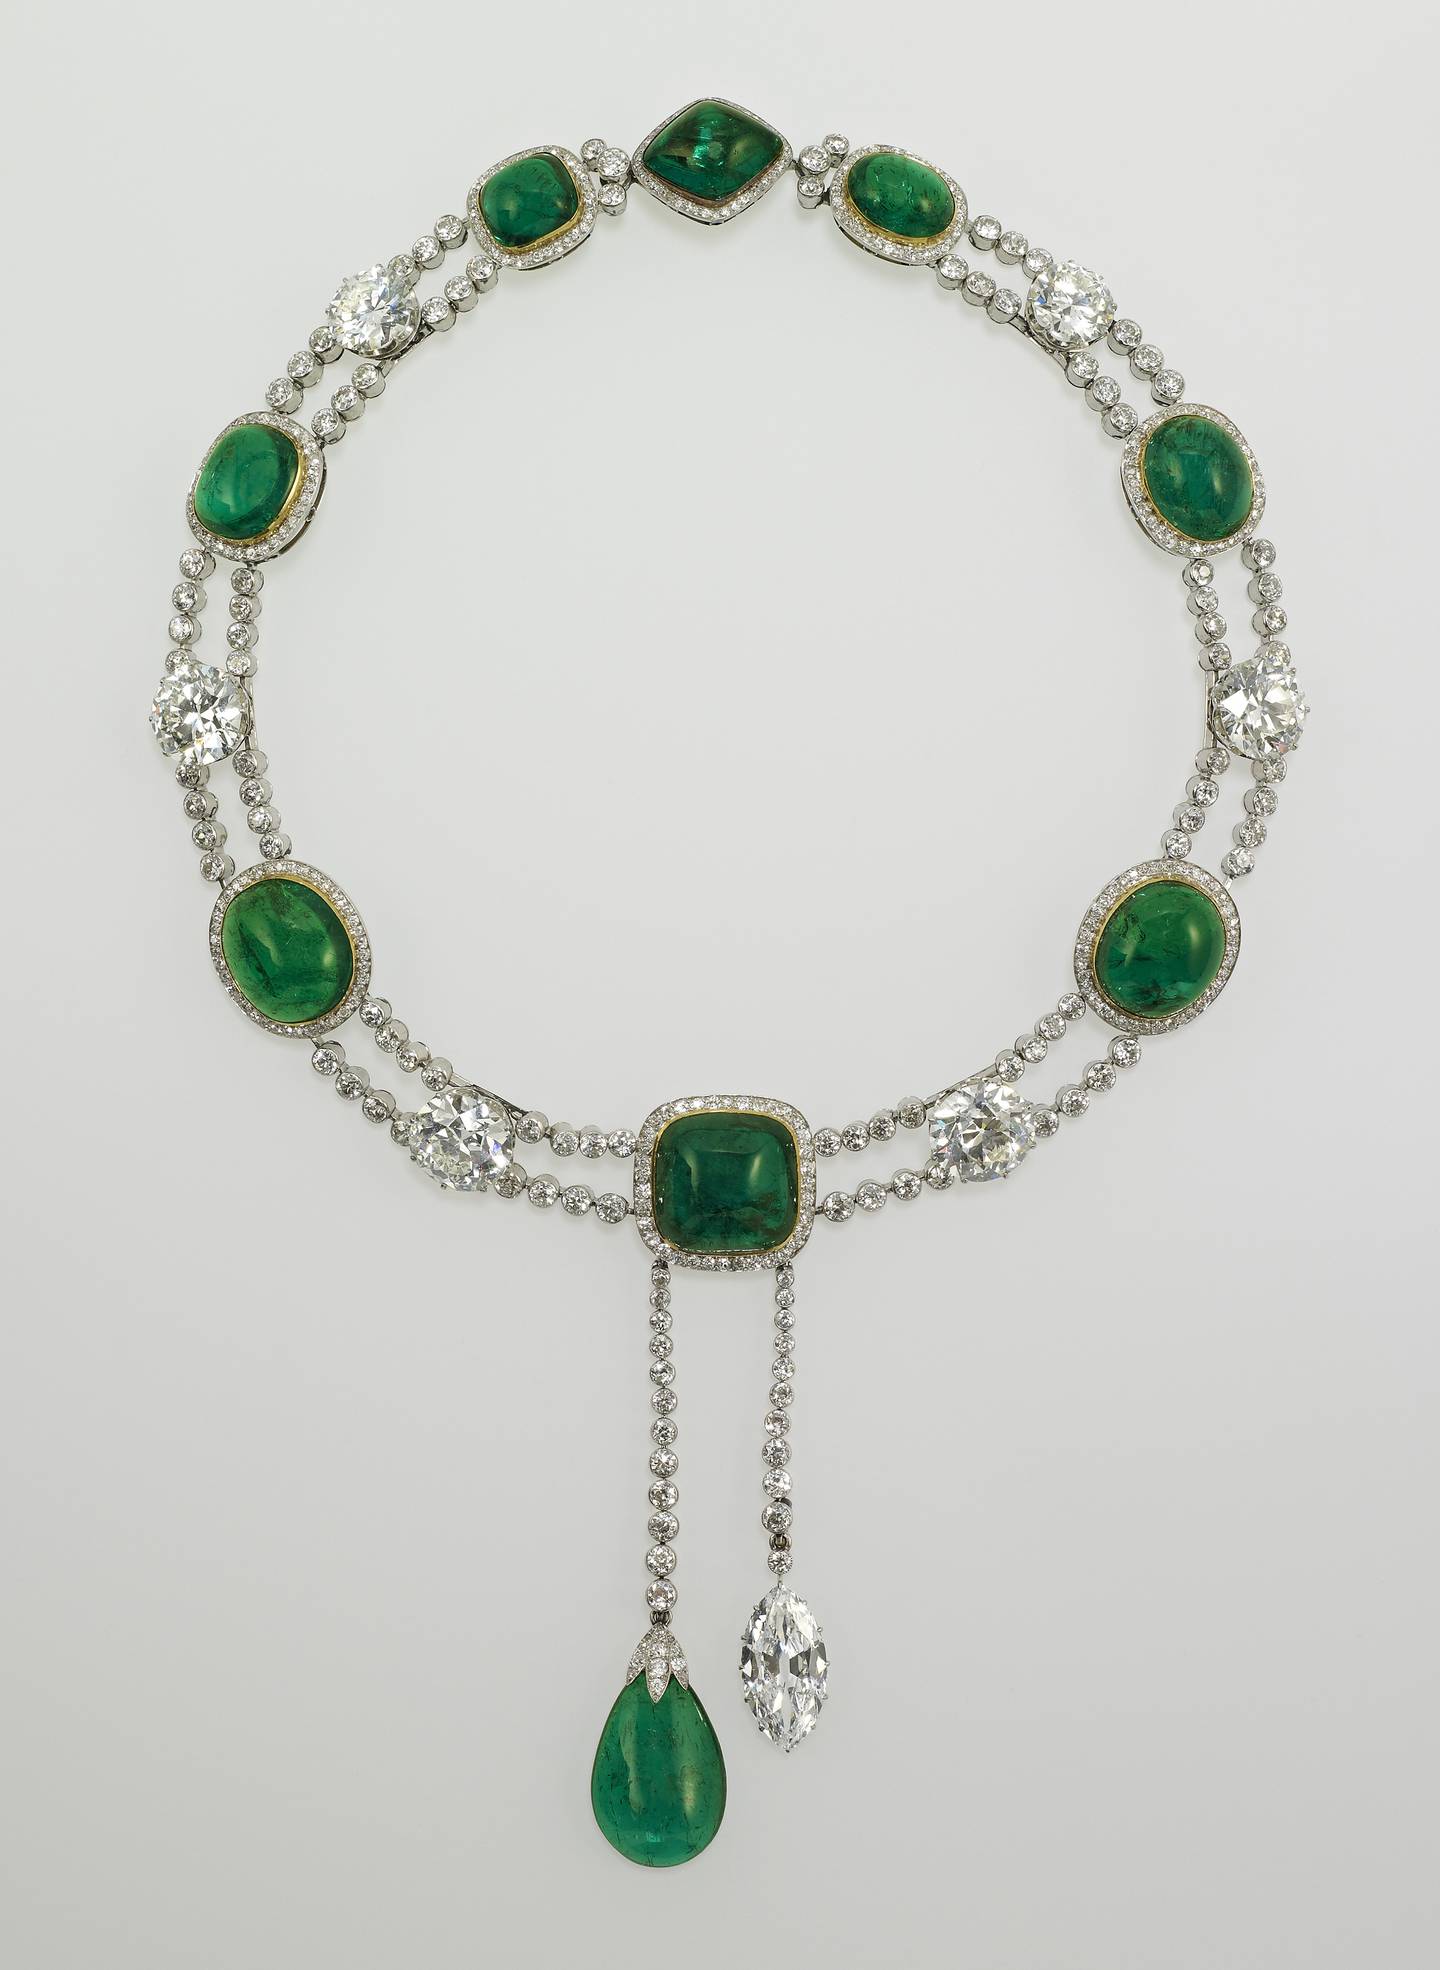 The Delhi Durbar necklace contains diamonds cut from a larger 3,106-carat gemstone. Photo: Royal Collection Trust